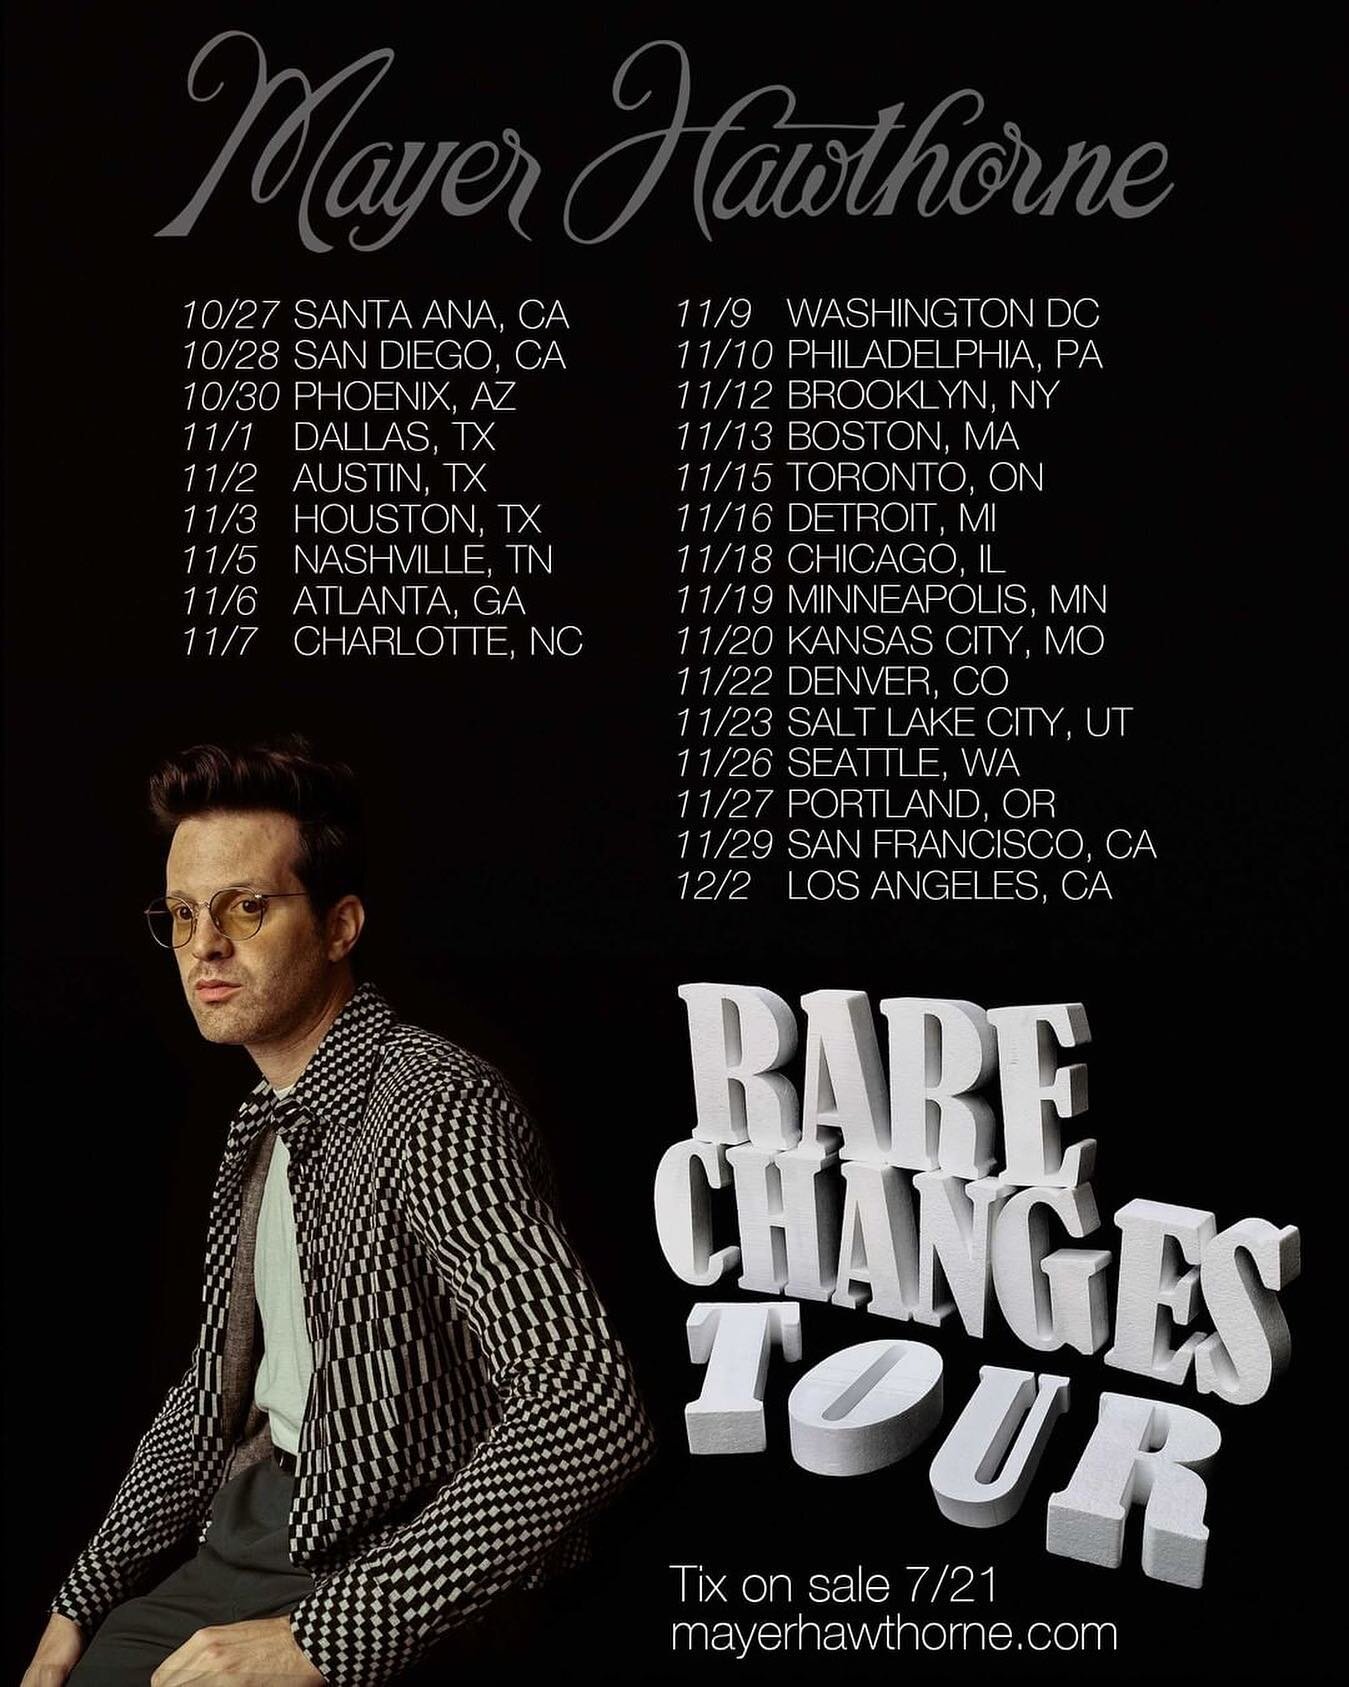 Mayer Hawthorne US Tour &lsquo;Rare Changes&rsquo; - Tickets on sale now! Link In Bio  @mayerhawthorne 

Mgmt // Jackson Perry 

ATCManagement #Tour #USA #LiveMusic #Concert #Festival #Summer #MusicTour #Music #Events #MayerHawthorne